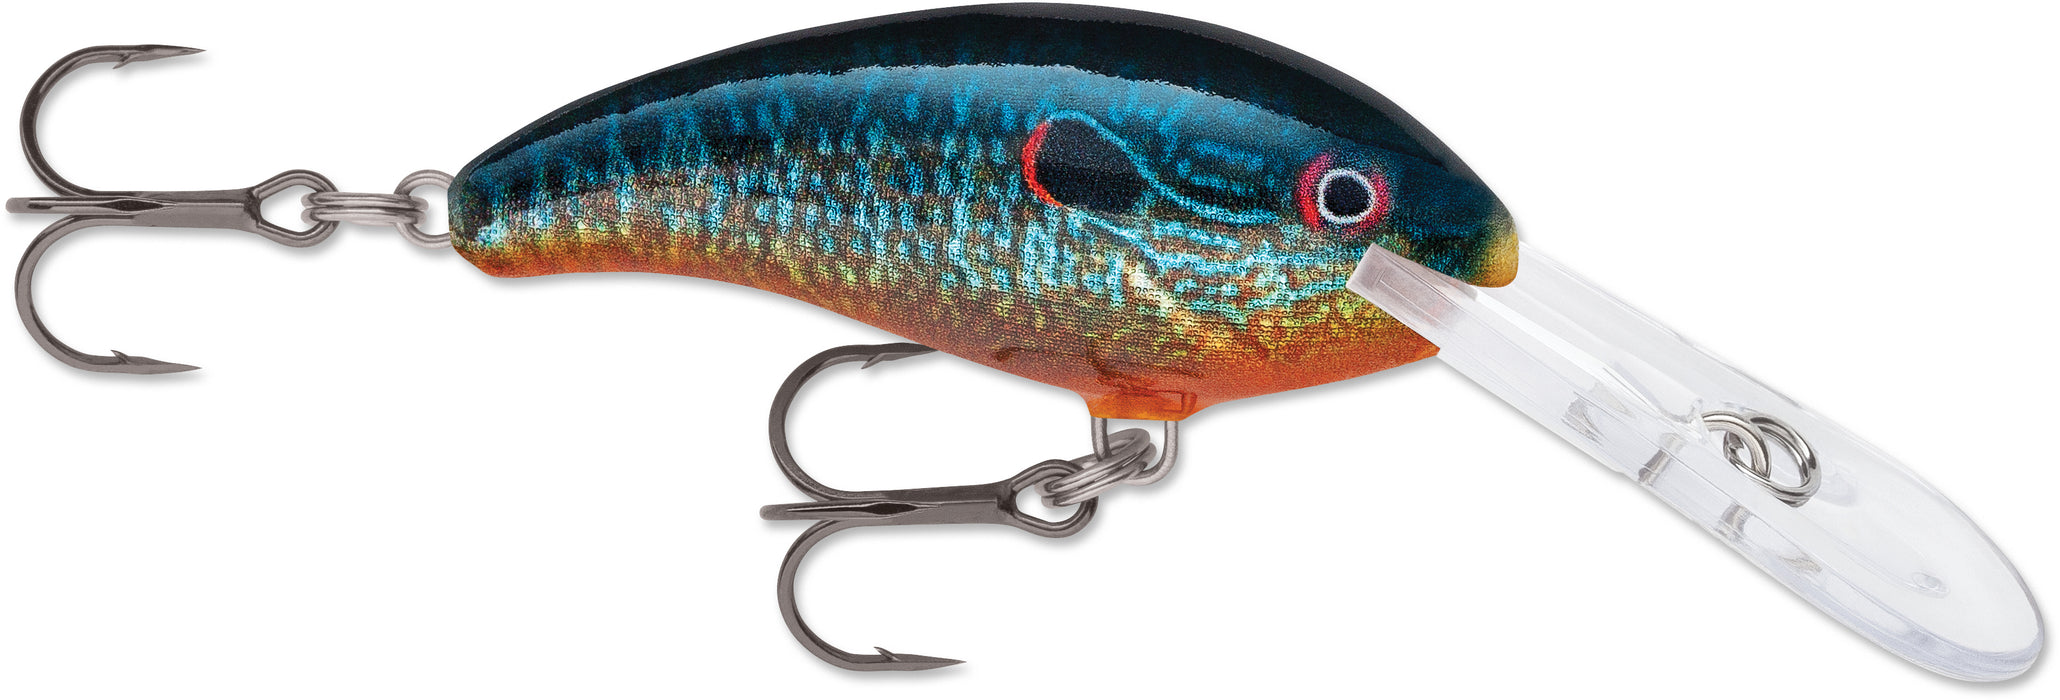 Paddle Tail on a Clip - Aubrey Dagama Lures - On-line Fishing Lure Shop